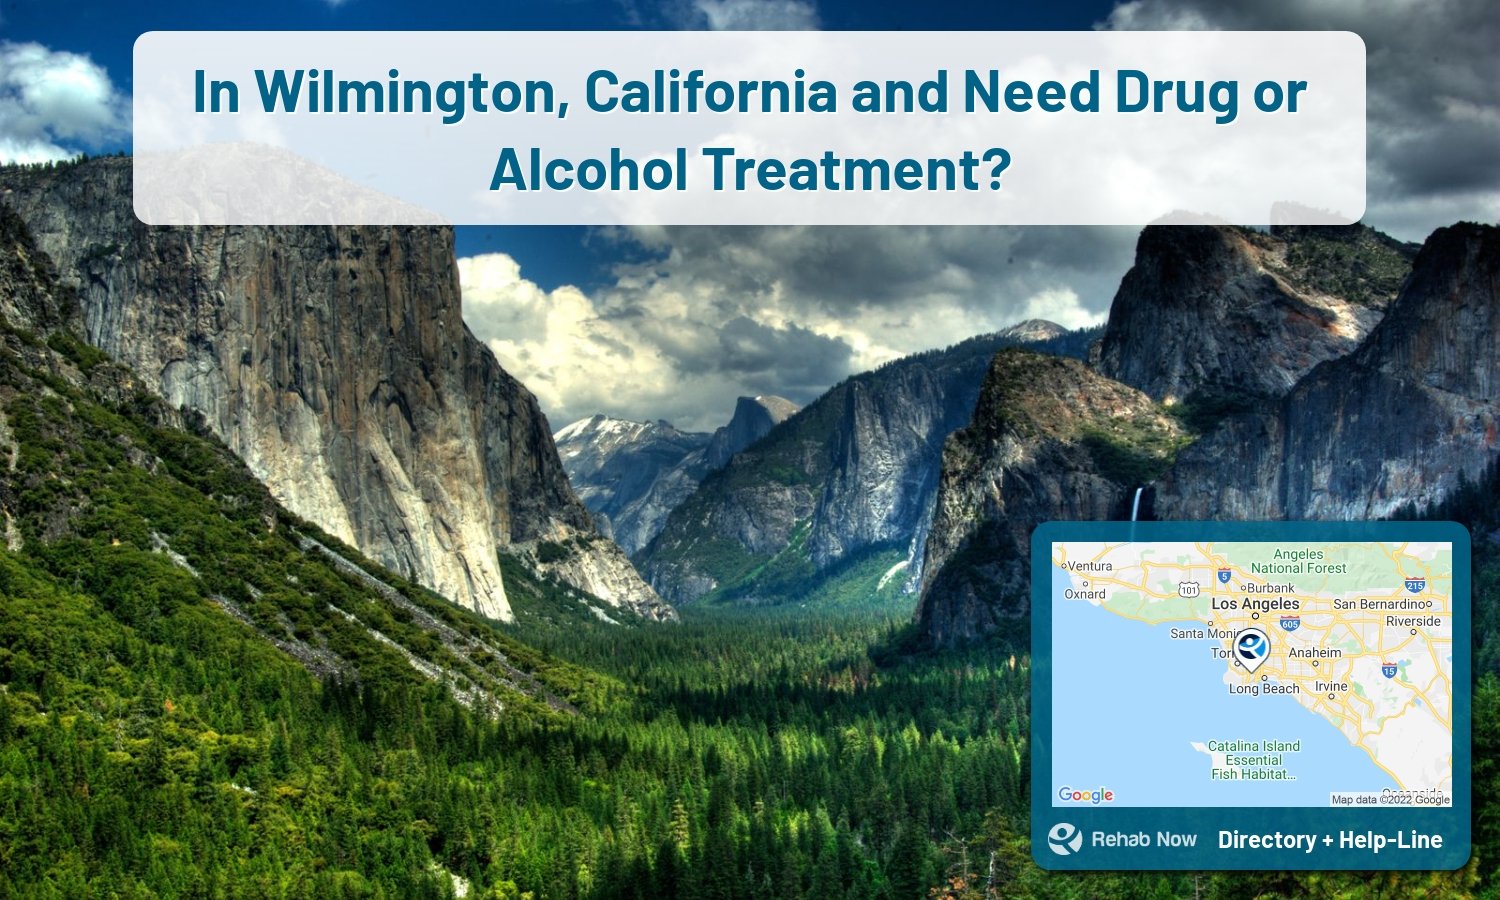 List of alcohol and drug treatment centers near you in Wilmington, California. Research certifications, programs, methods, pricing, and more.